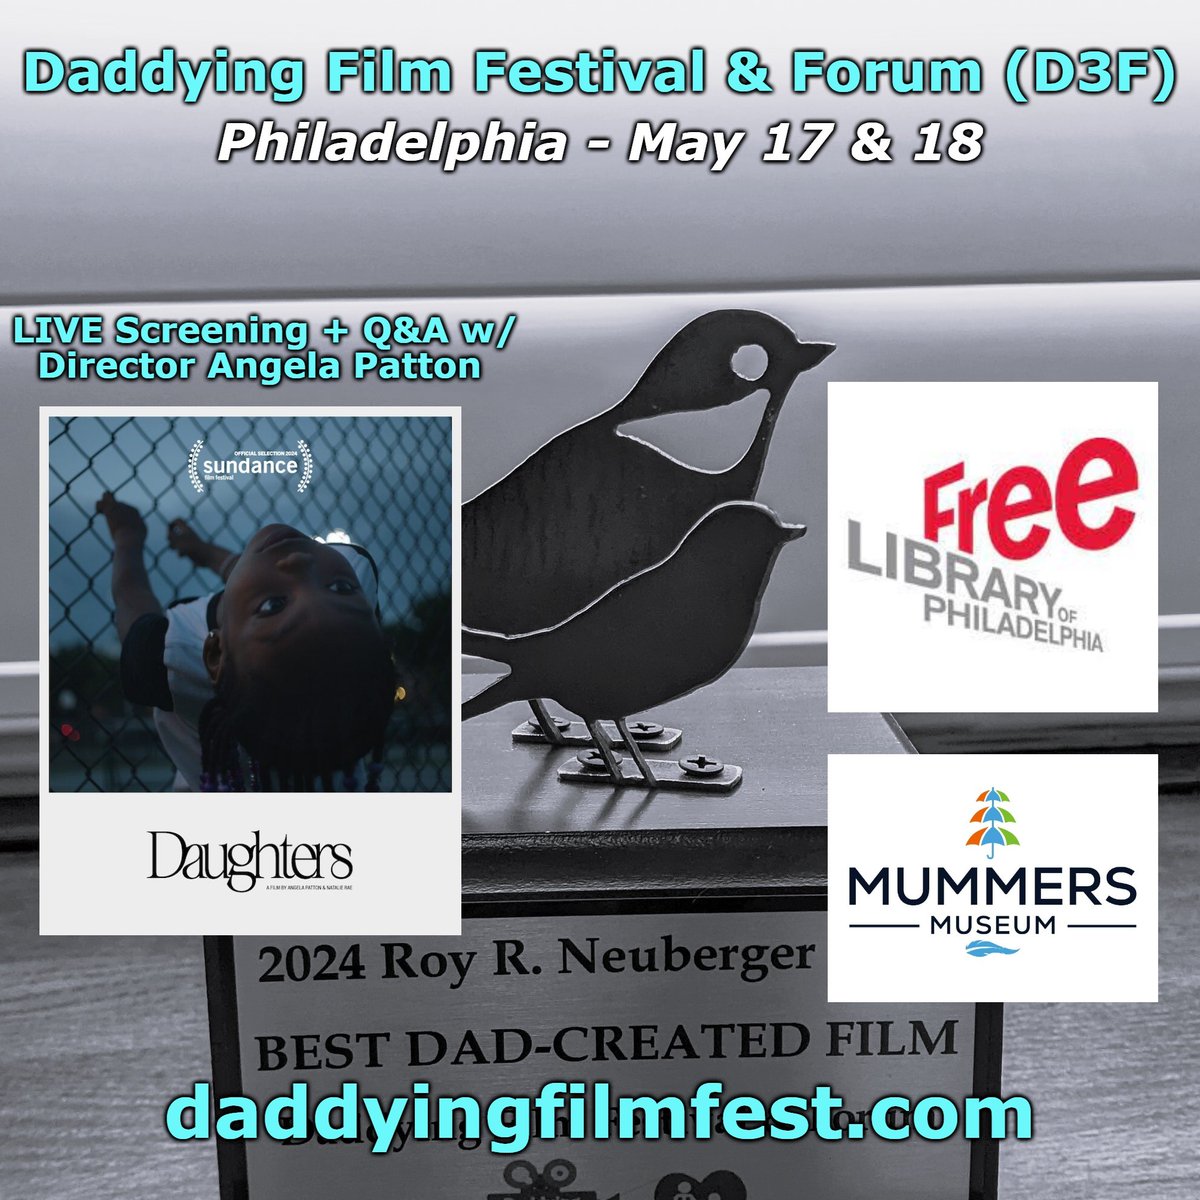 That's a wrap on the virtual #Daddying #FilmFestival! Thx to all our filmmakers, Circle of Friends members who helped promote & all who attended/voted! Coming soon: Atticus Awards this wkend. LIVE Forum NEXT weekend in Philly, then planning D3F2025! @equimundo_org @ArtEddy3 @GPFO